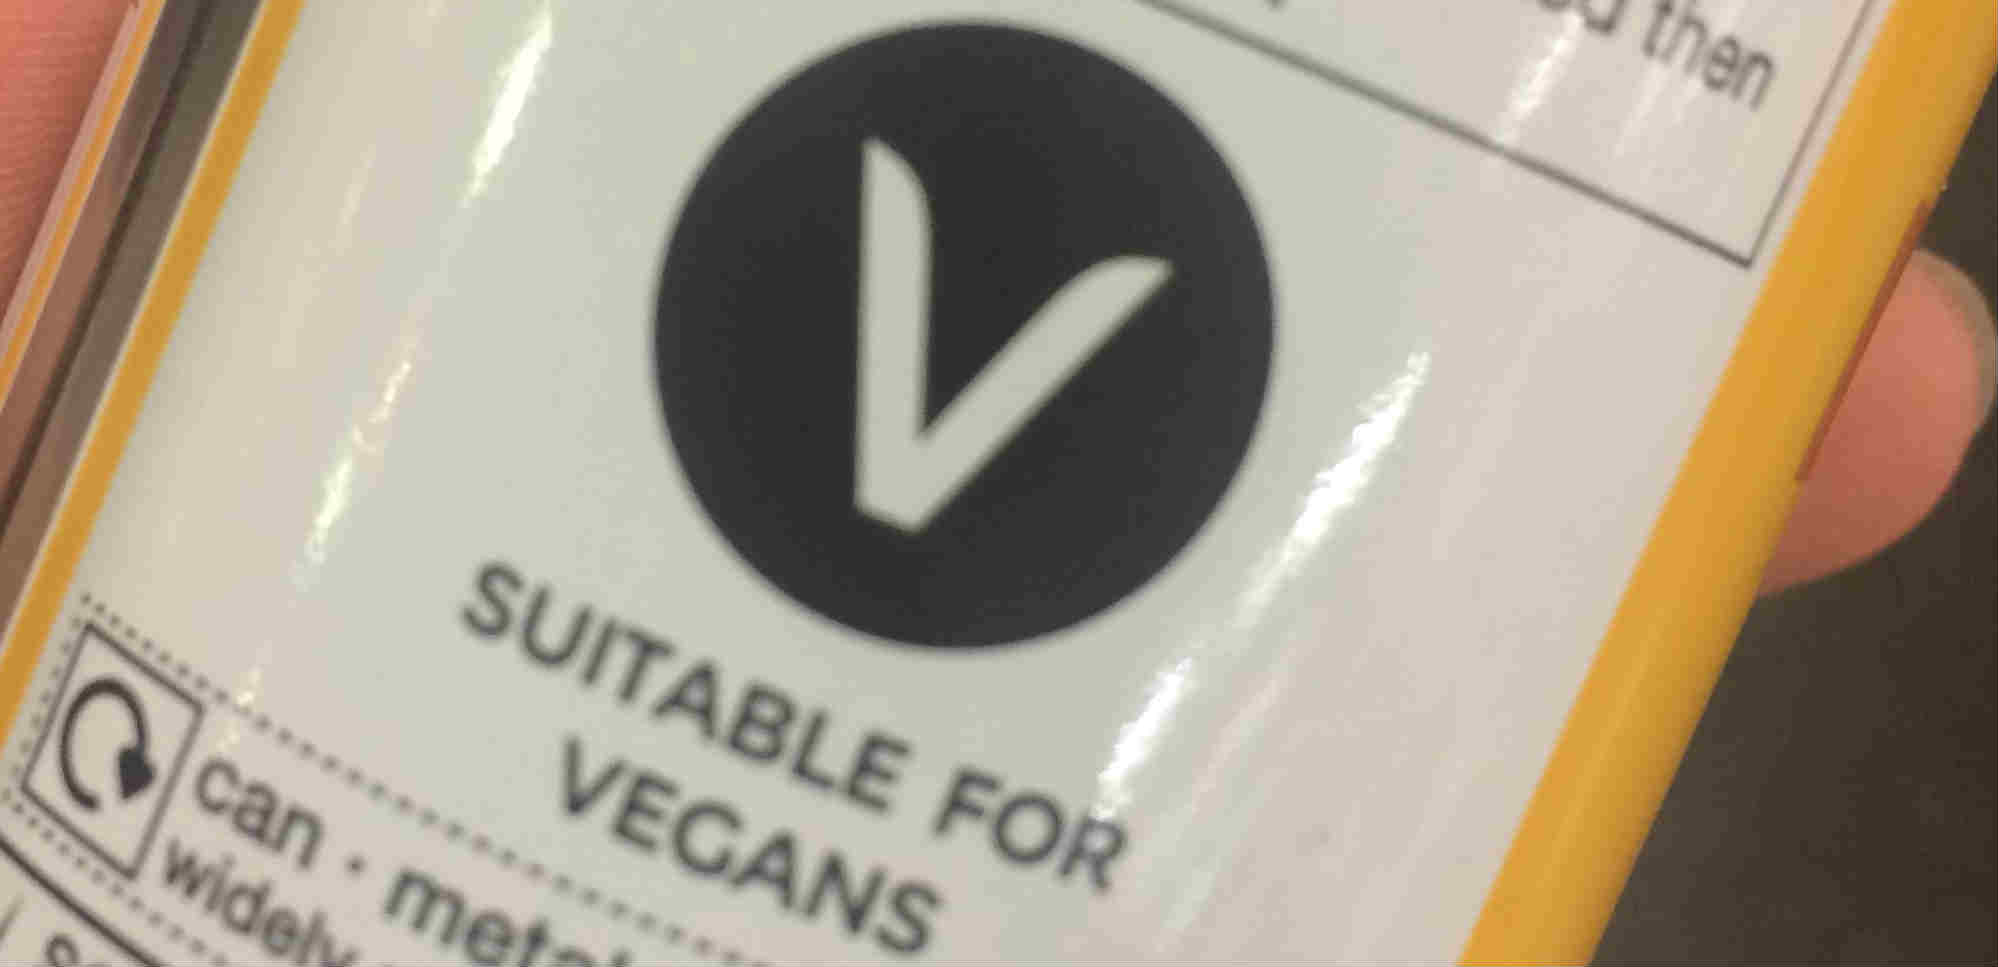 New vegan cleaning products at Marks & Spencer